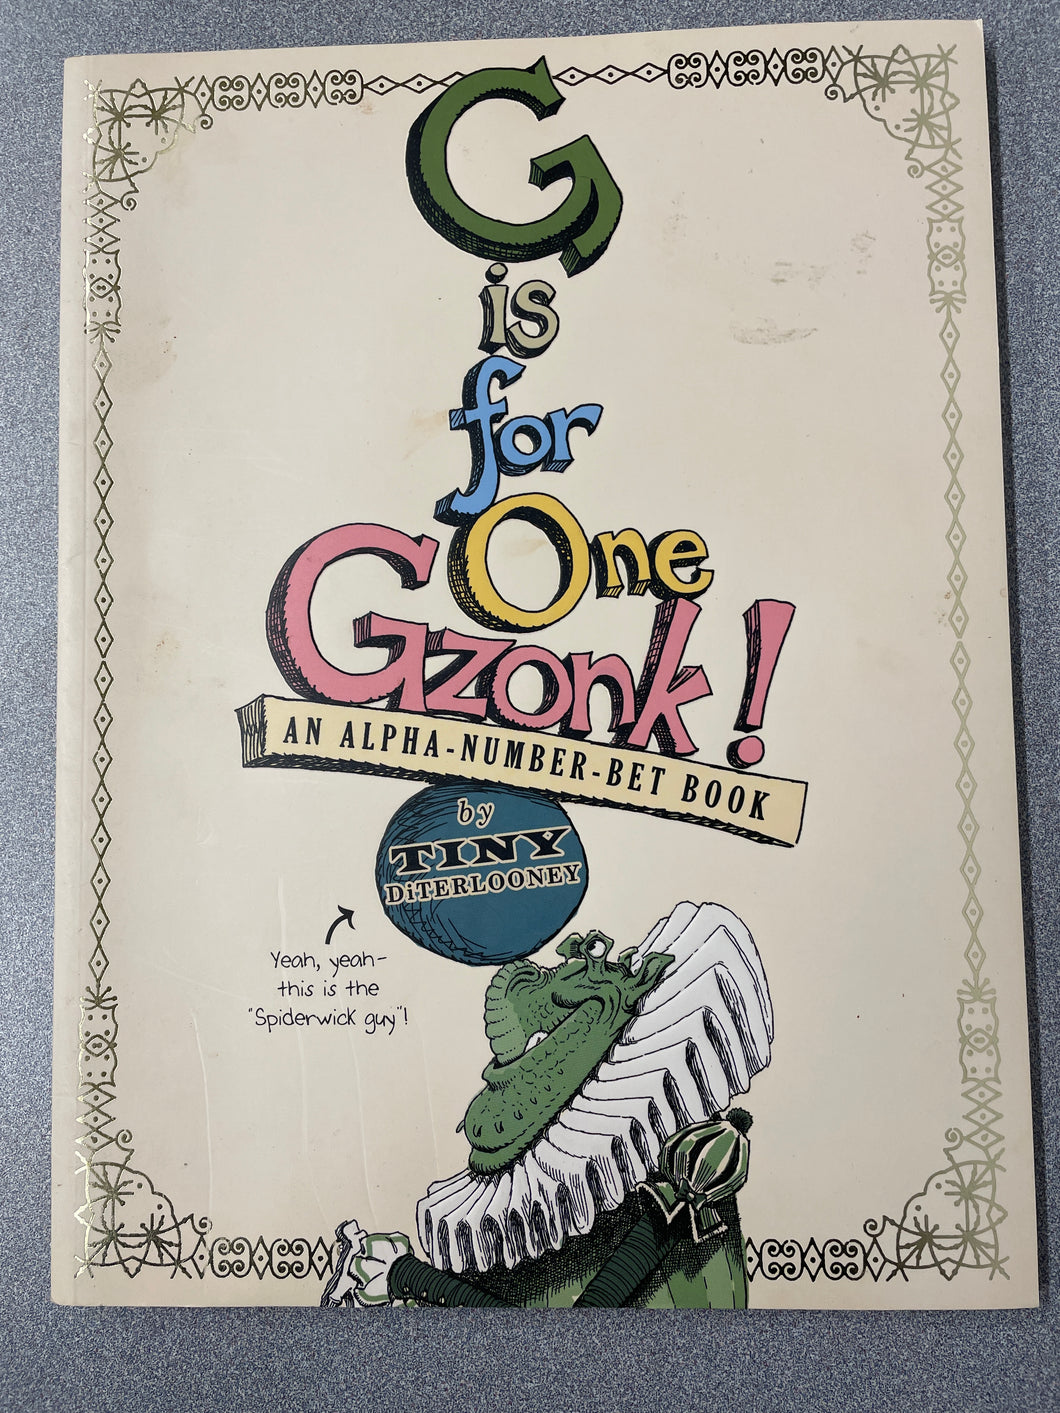 DiTerlizzi, Tony, G is for One Gzonk! An Alpha-Number- Bet Book [2006] CP 4/24